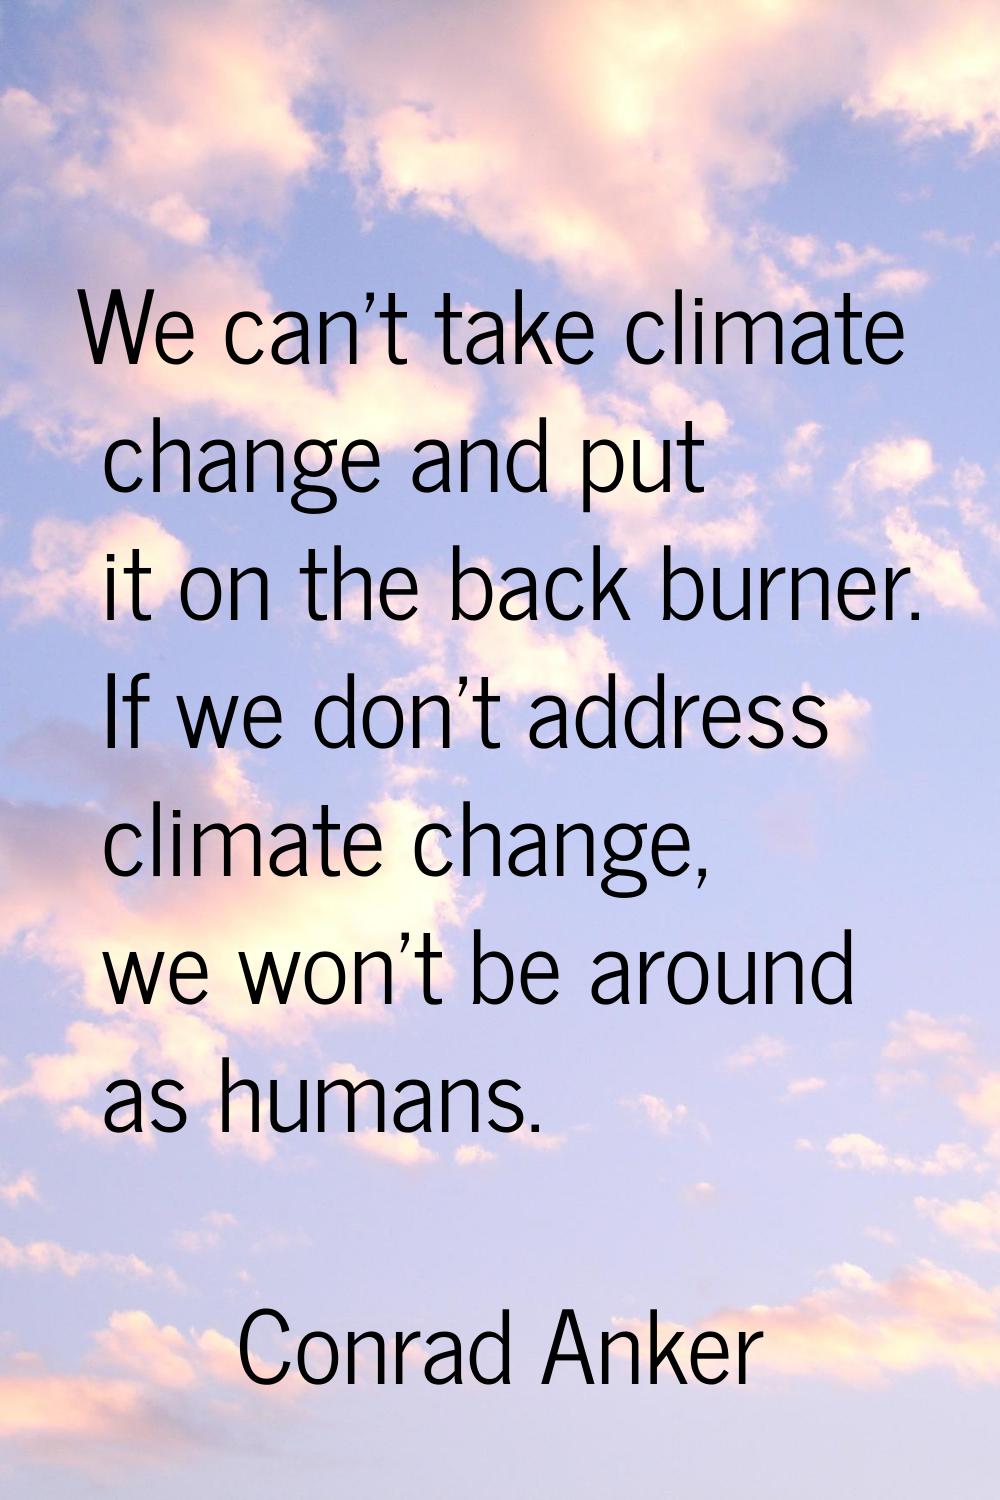 We can't take climate change and put it on the back burner. If we don't address climate change, we 